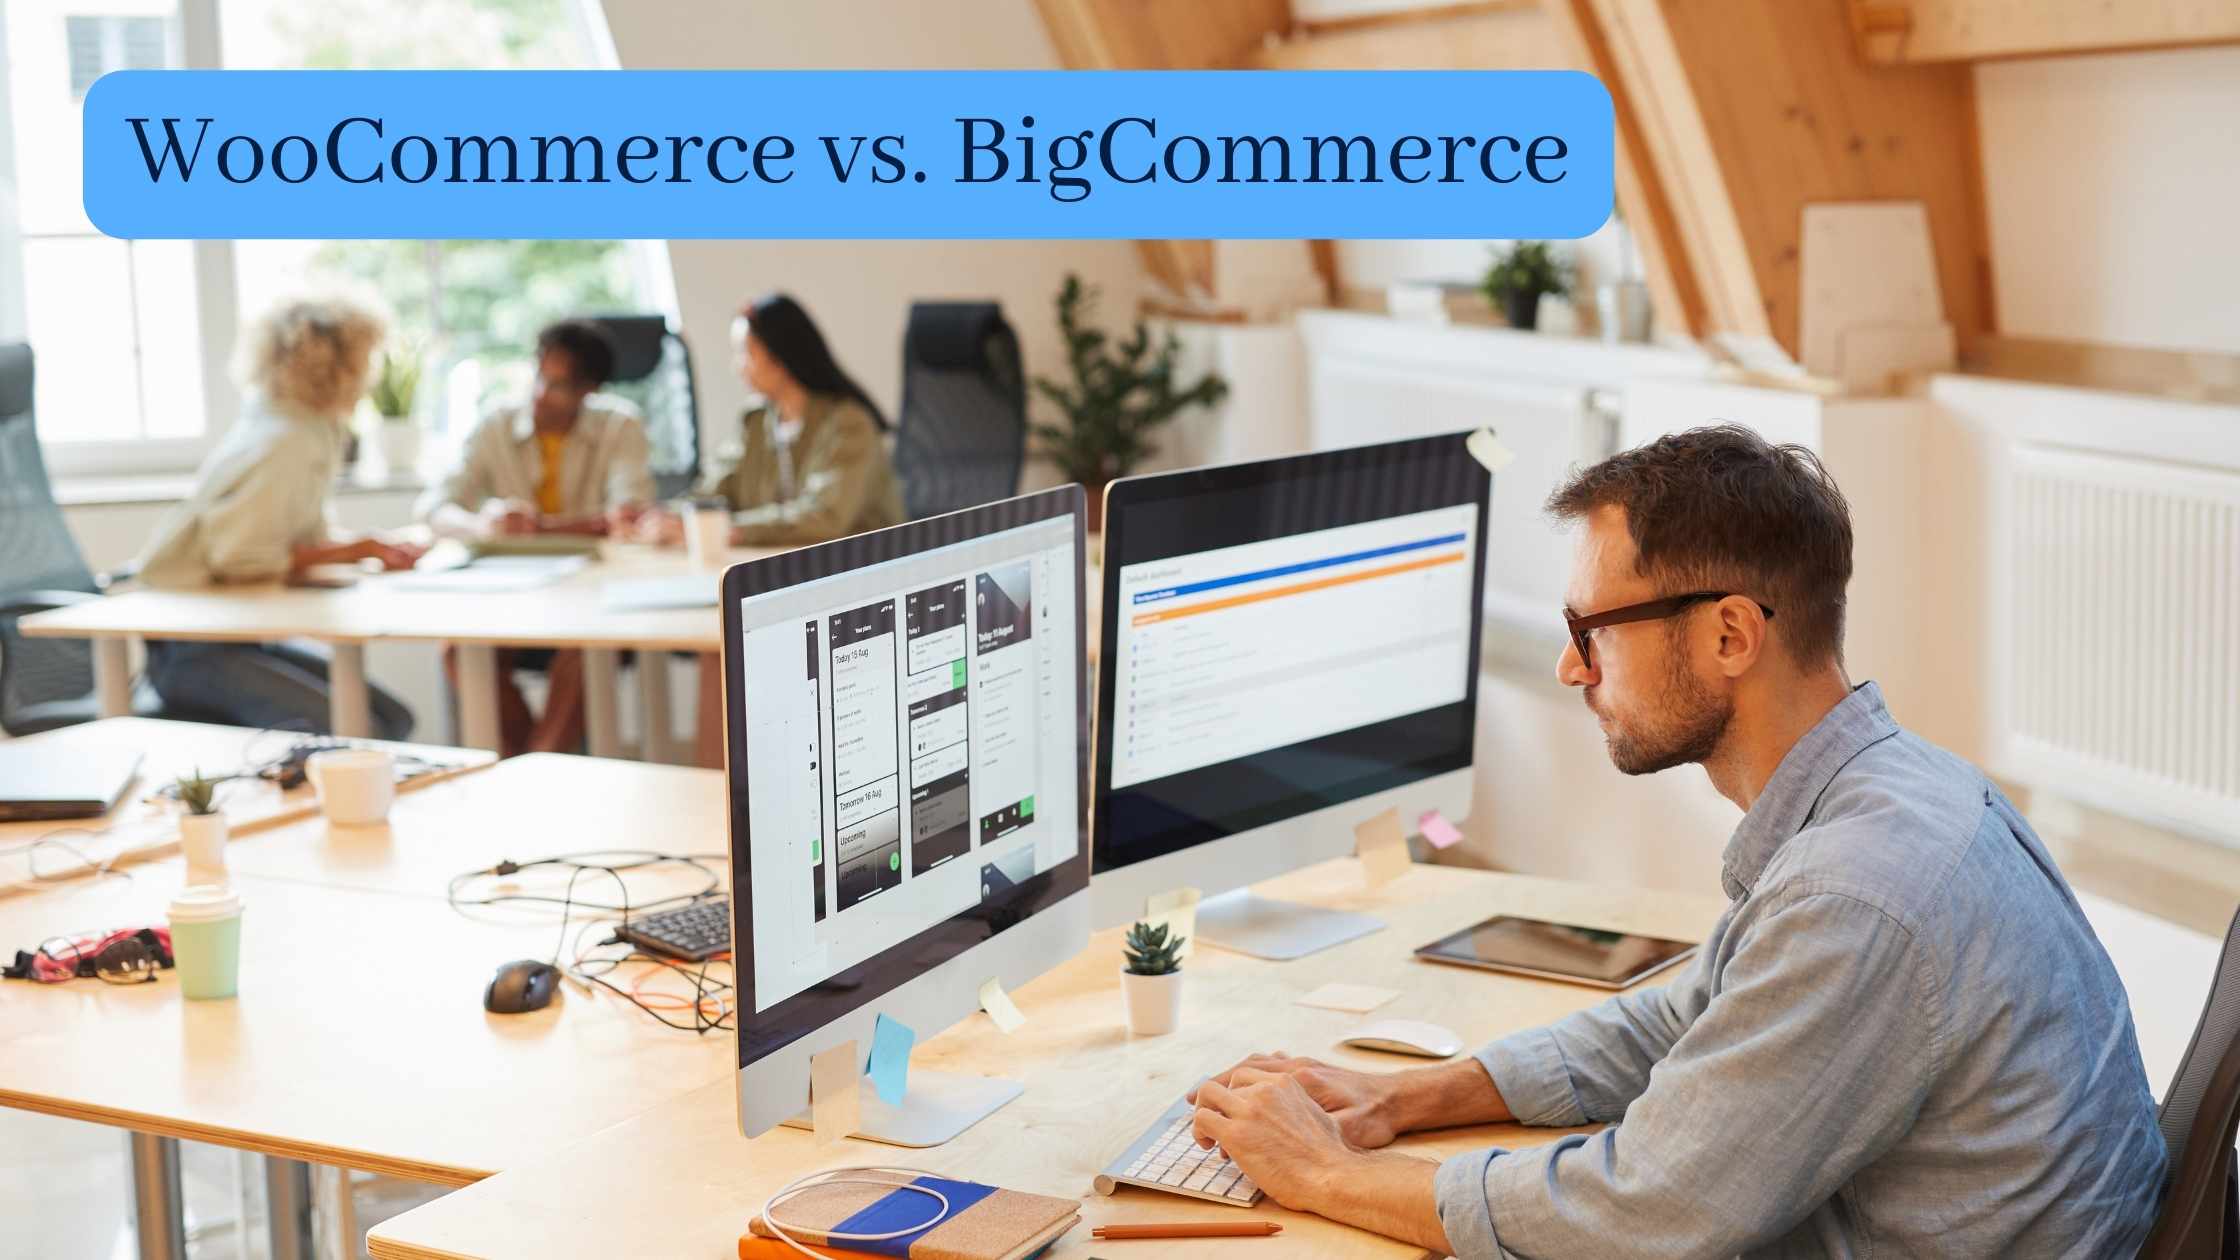 igcommerce is a website builder platform for eCommerce. It offers advanced features for eCommerce, such as online store creation, search engines, hosting, marketing, and security for businesses.